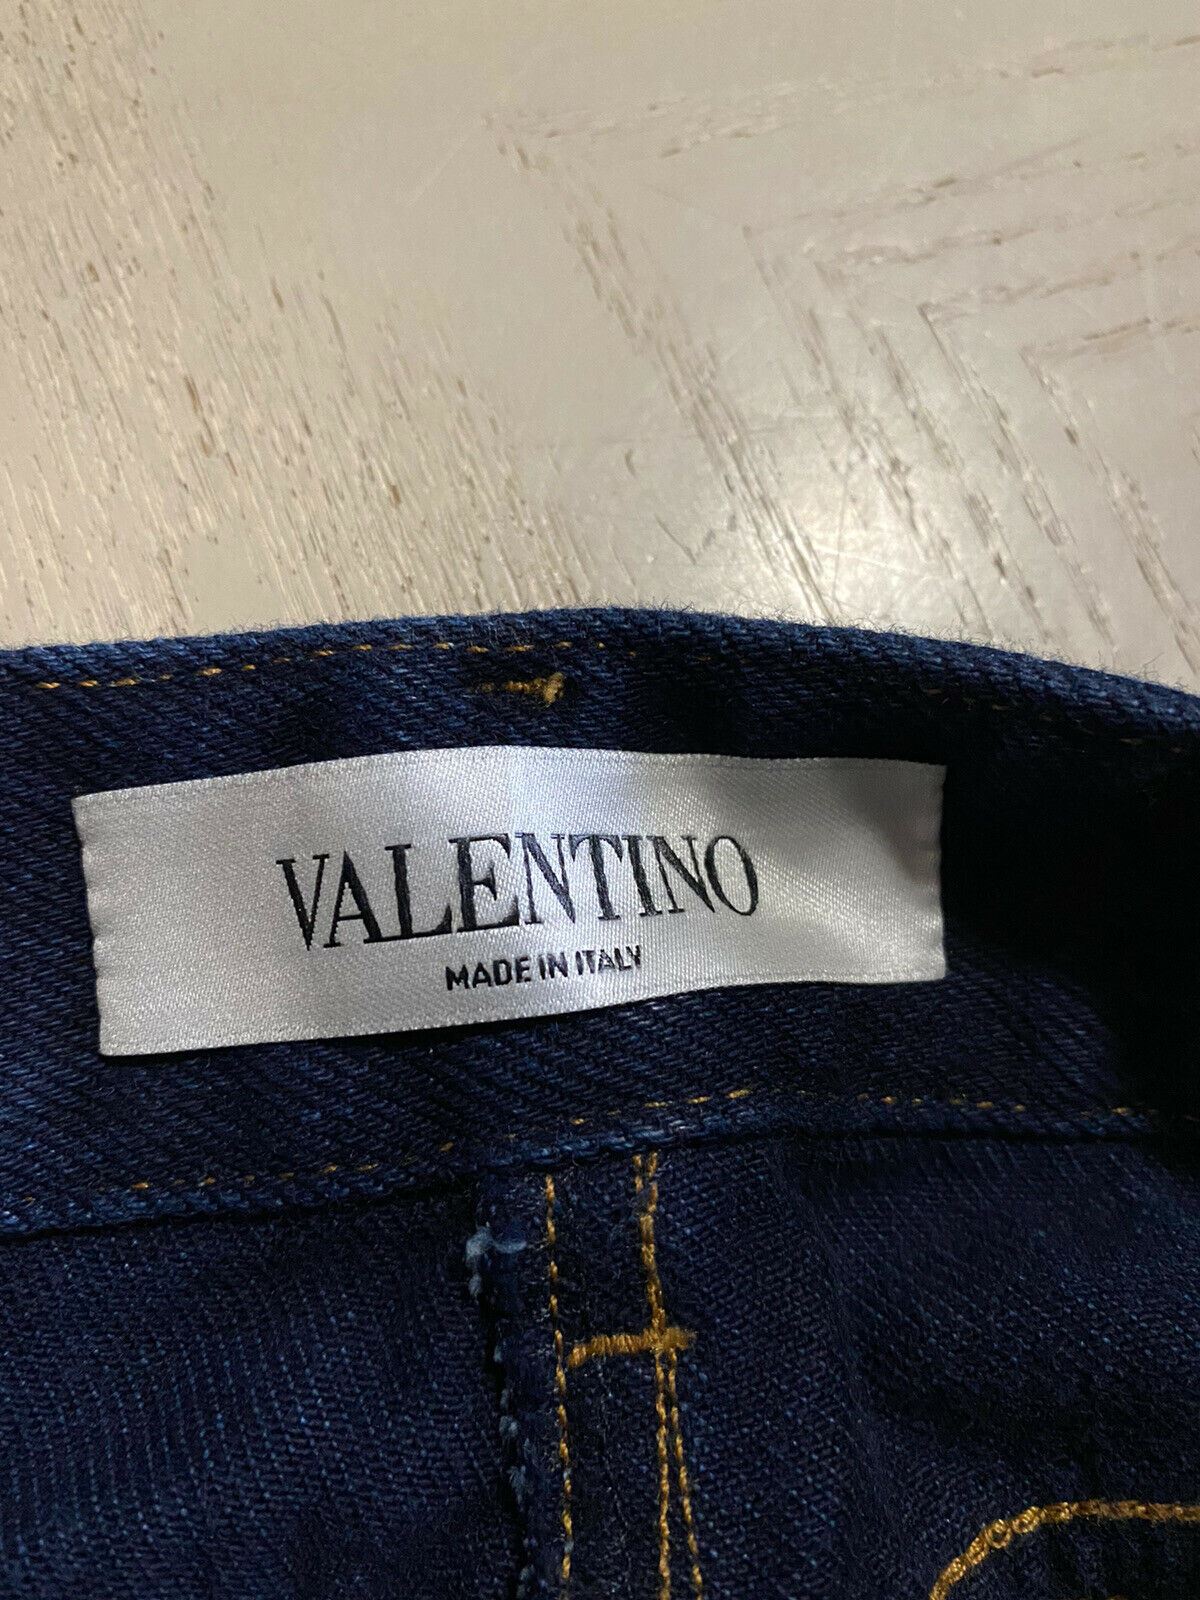 New $1200 Valentino Women's Crop Denim Flare Jeans Pants Blue 32 Italy